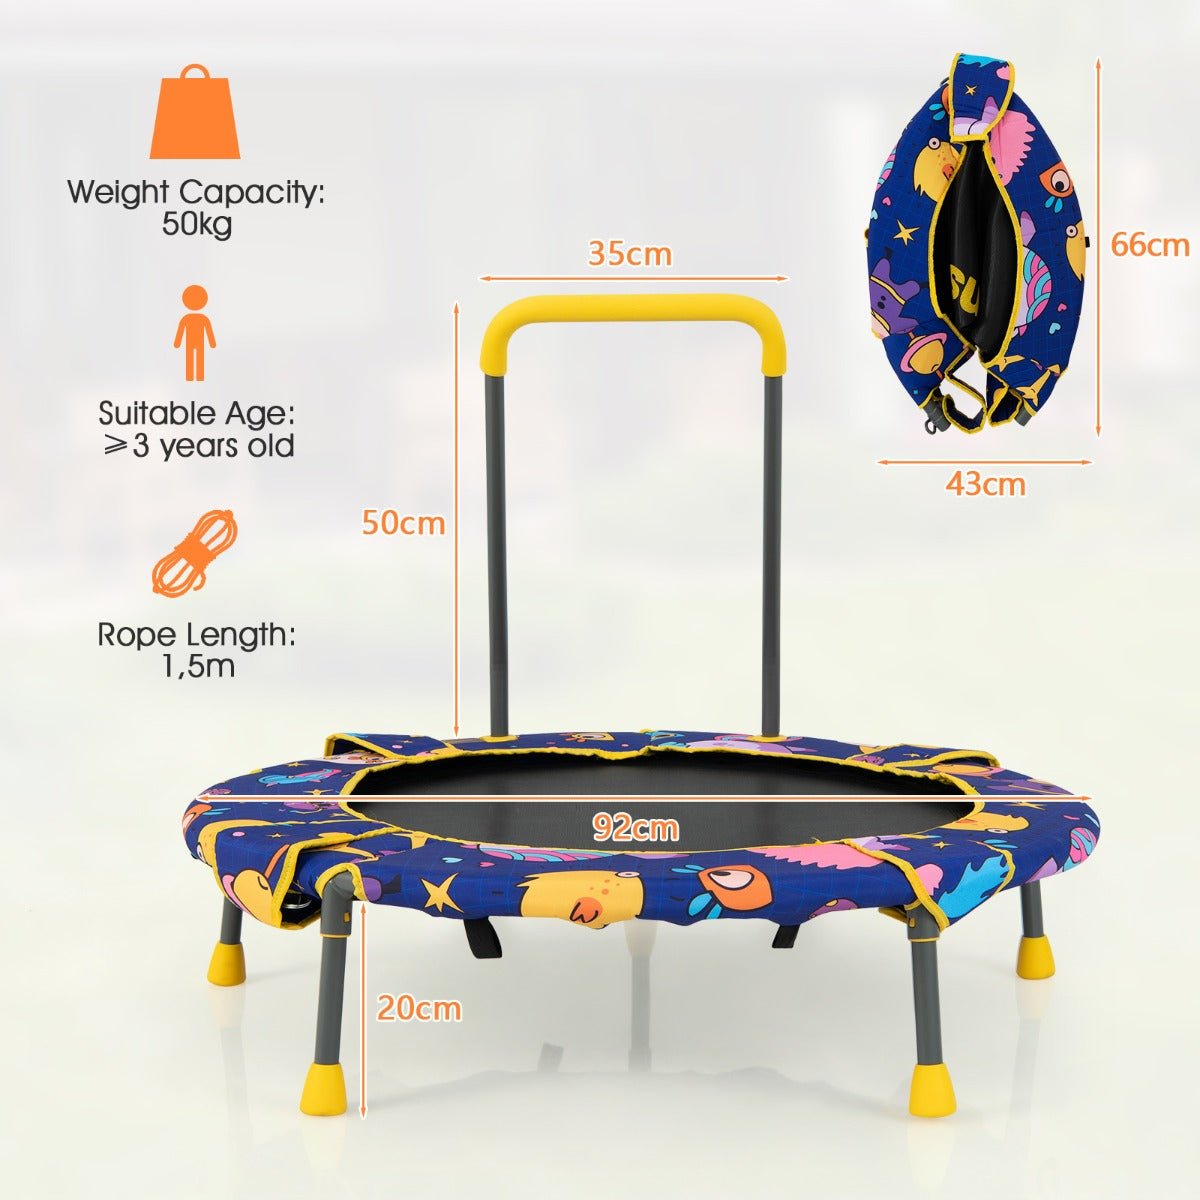 Active Adventure: Convertible Swing and Trampoline Set with Upholstered Handrail for Kids